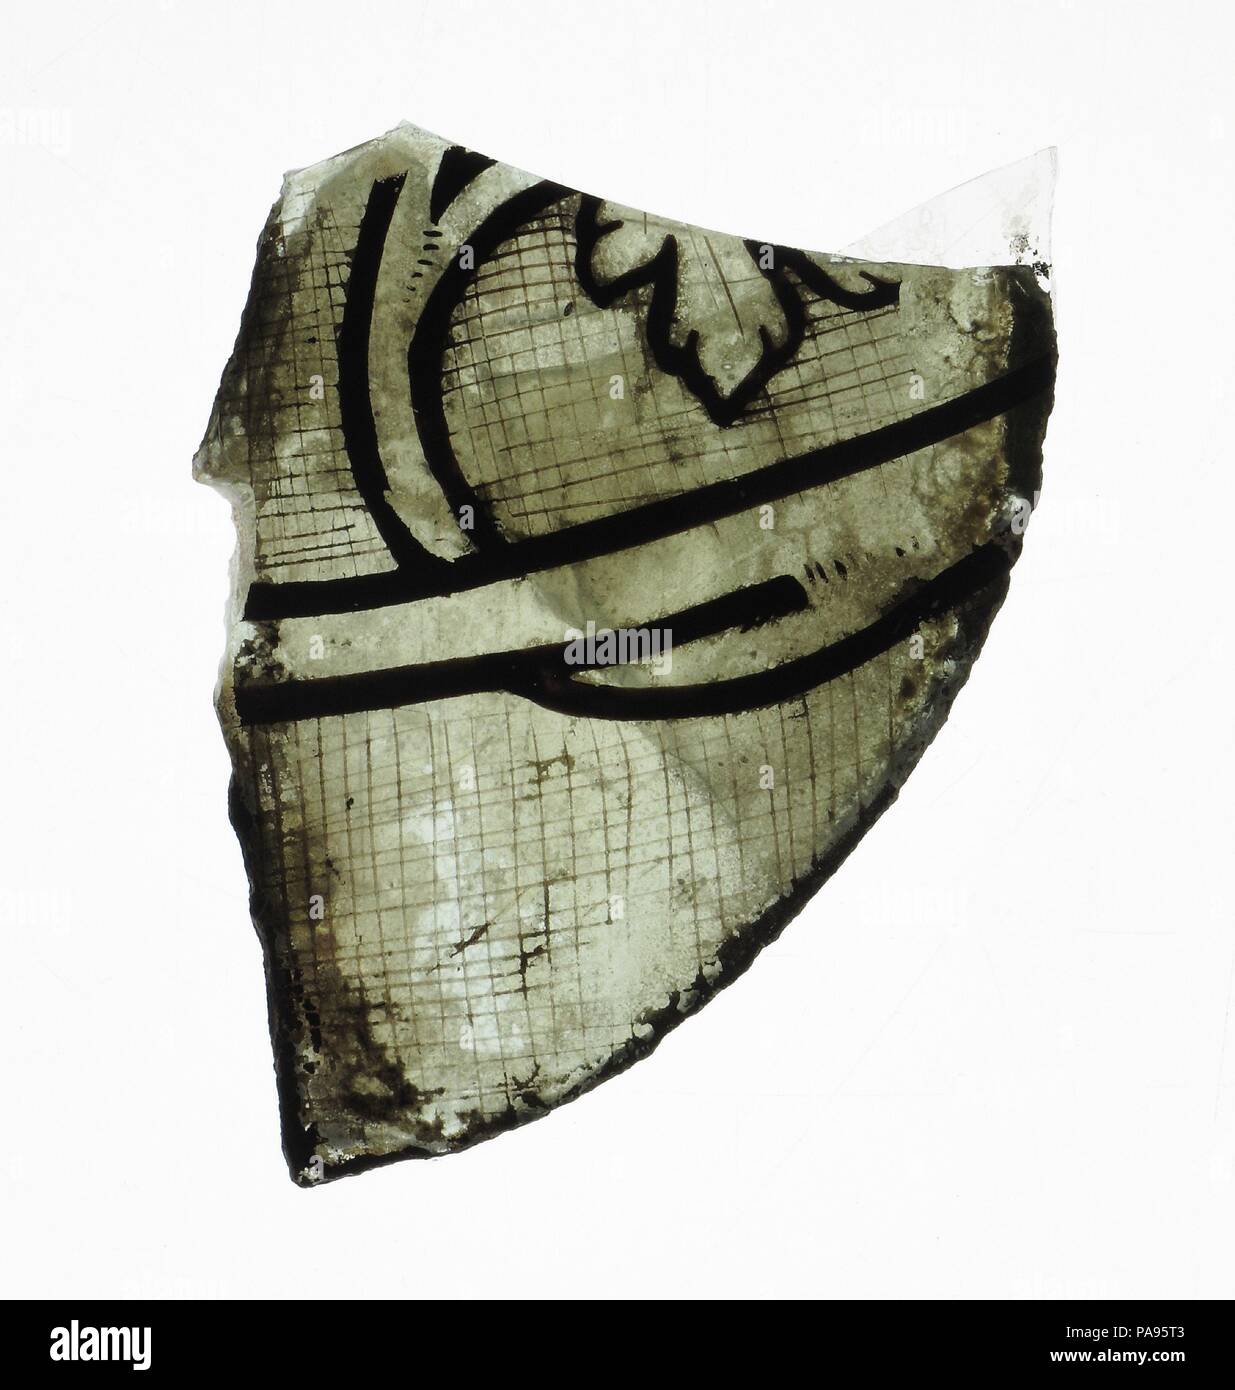 Glass Fragment. Culture: French. Dimensions: Overall: 2 15/16 x 2 9/16 in. (7.5 x 6.5 cm). Date: 14th century. Museum: Metropolitan Museum of Art, New York, USA. Stock Photo